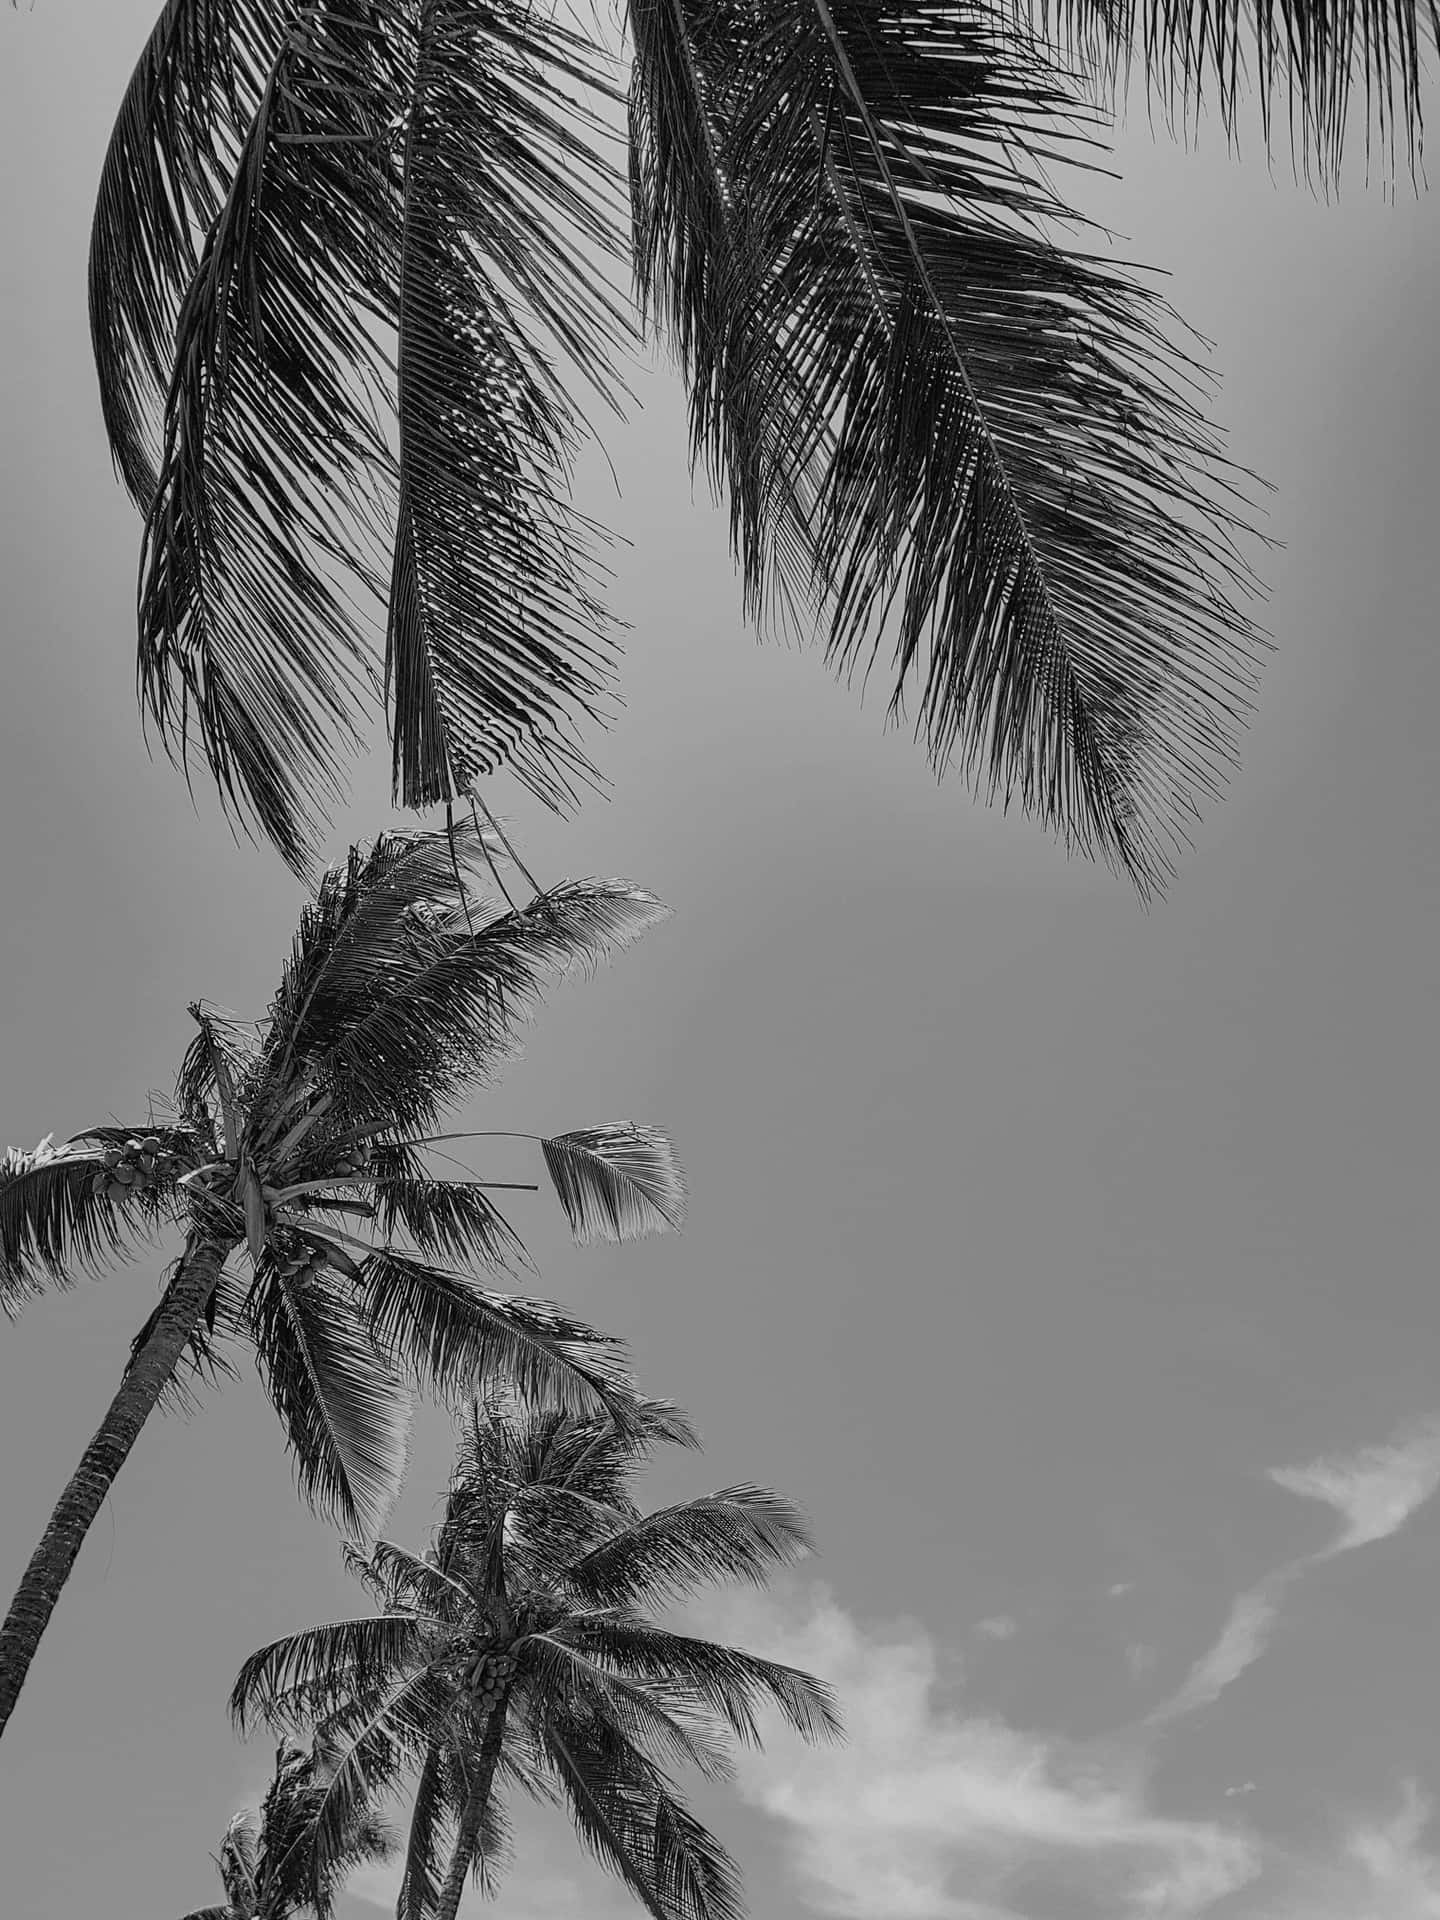 A black and white palm tree stands in a deserted beach. Wallpaper